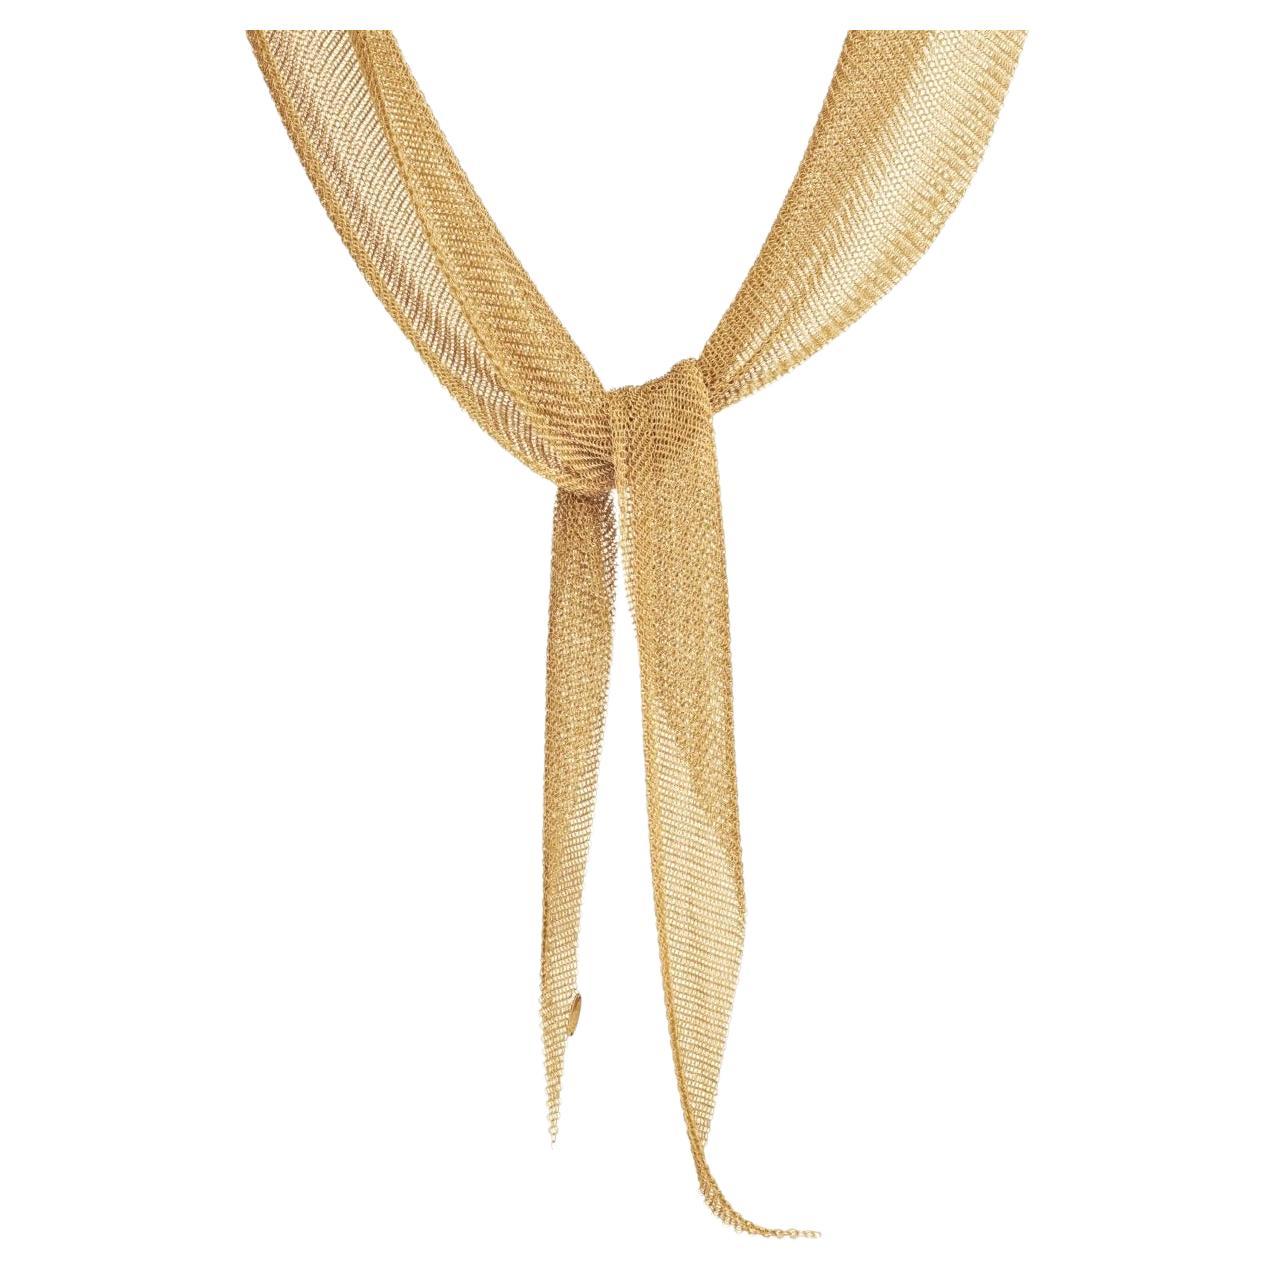 GOLD 'MESH SCARF' NECKLACE, ELSA PERETTI FOR TIFFANY & CO. in United States